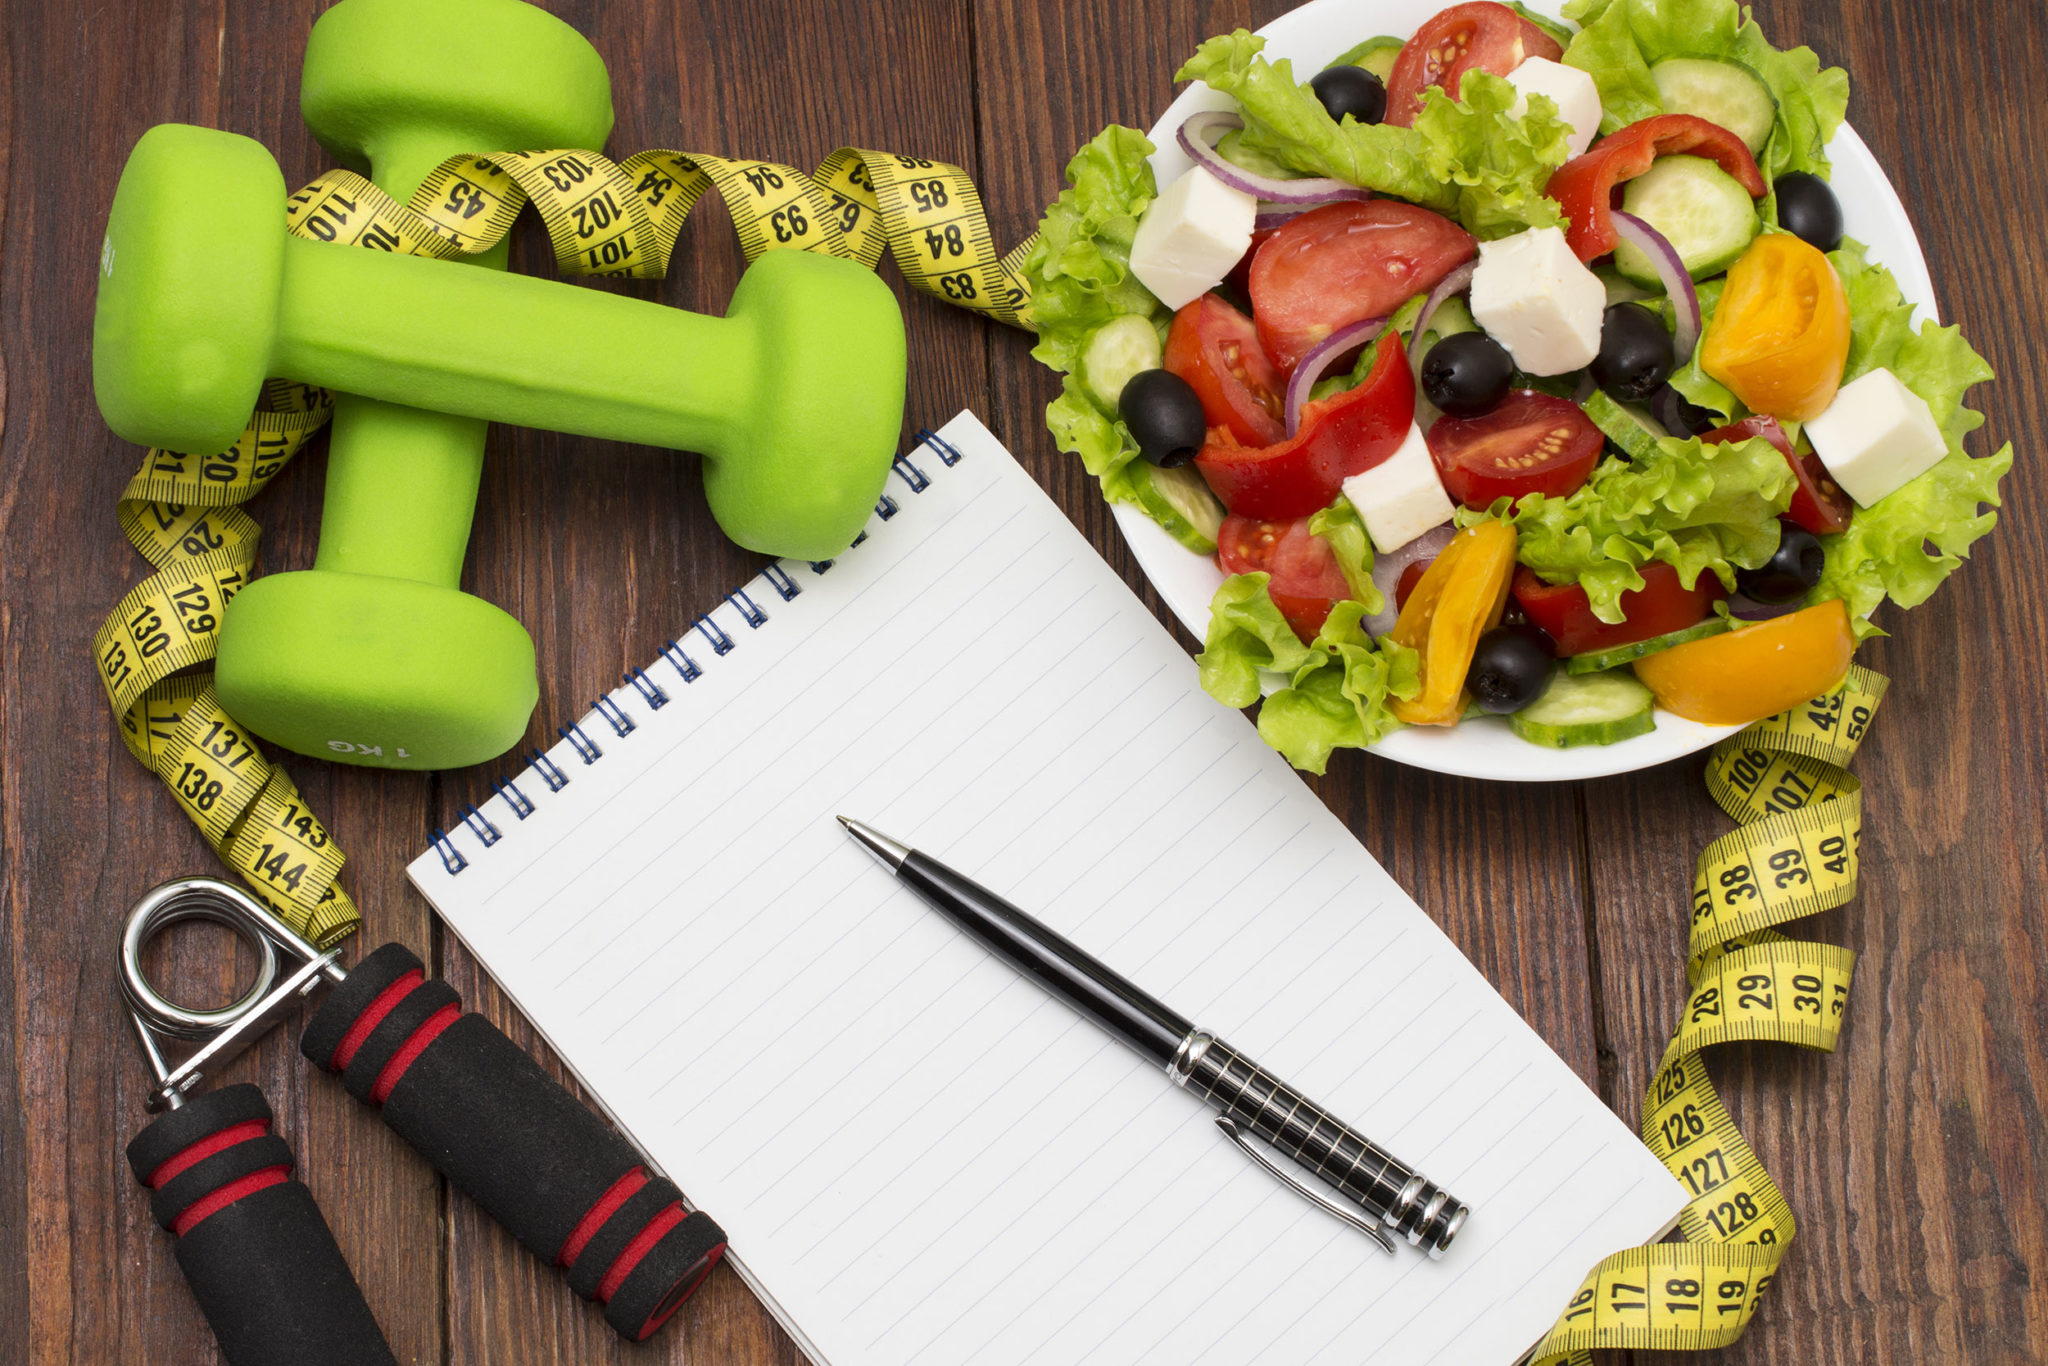 NWP Blog - Advice To Consider For Healthy Sports Nutrition